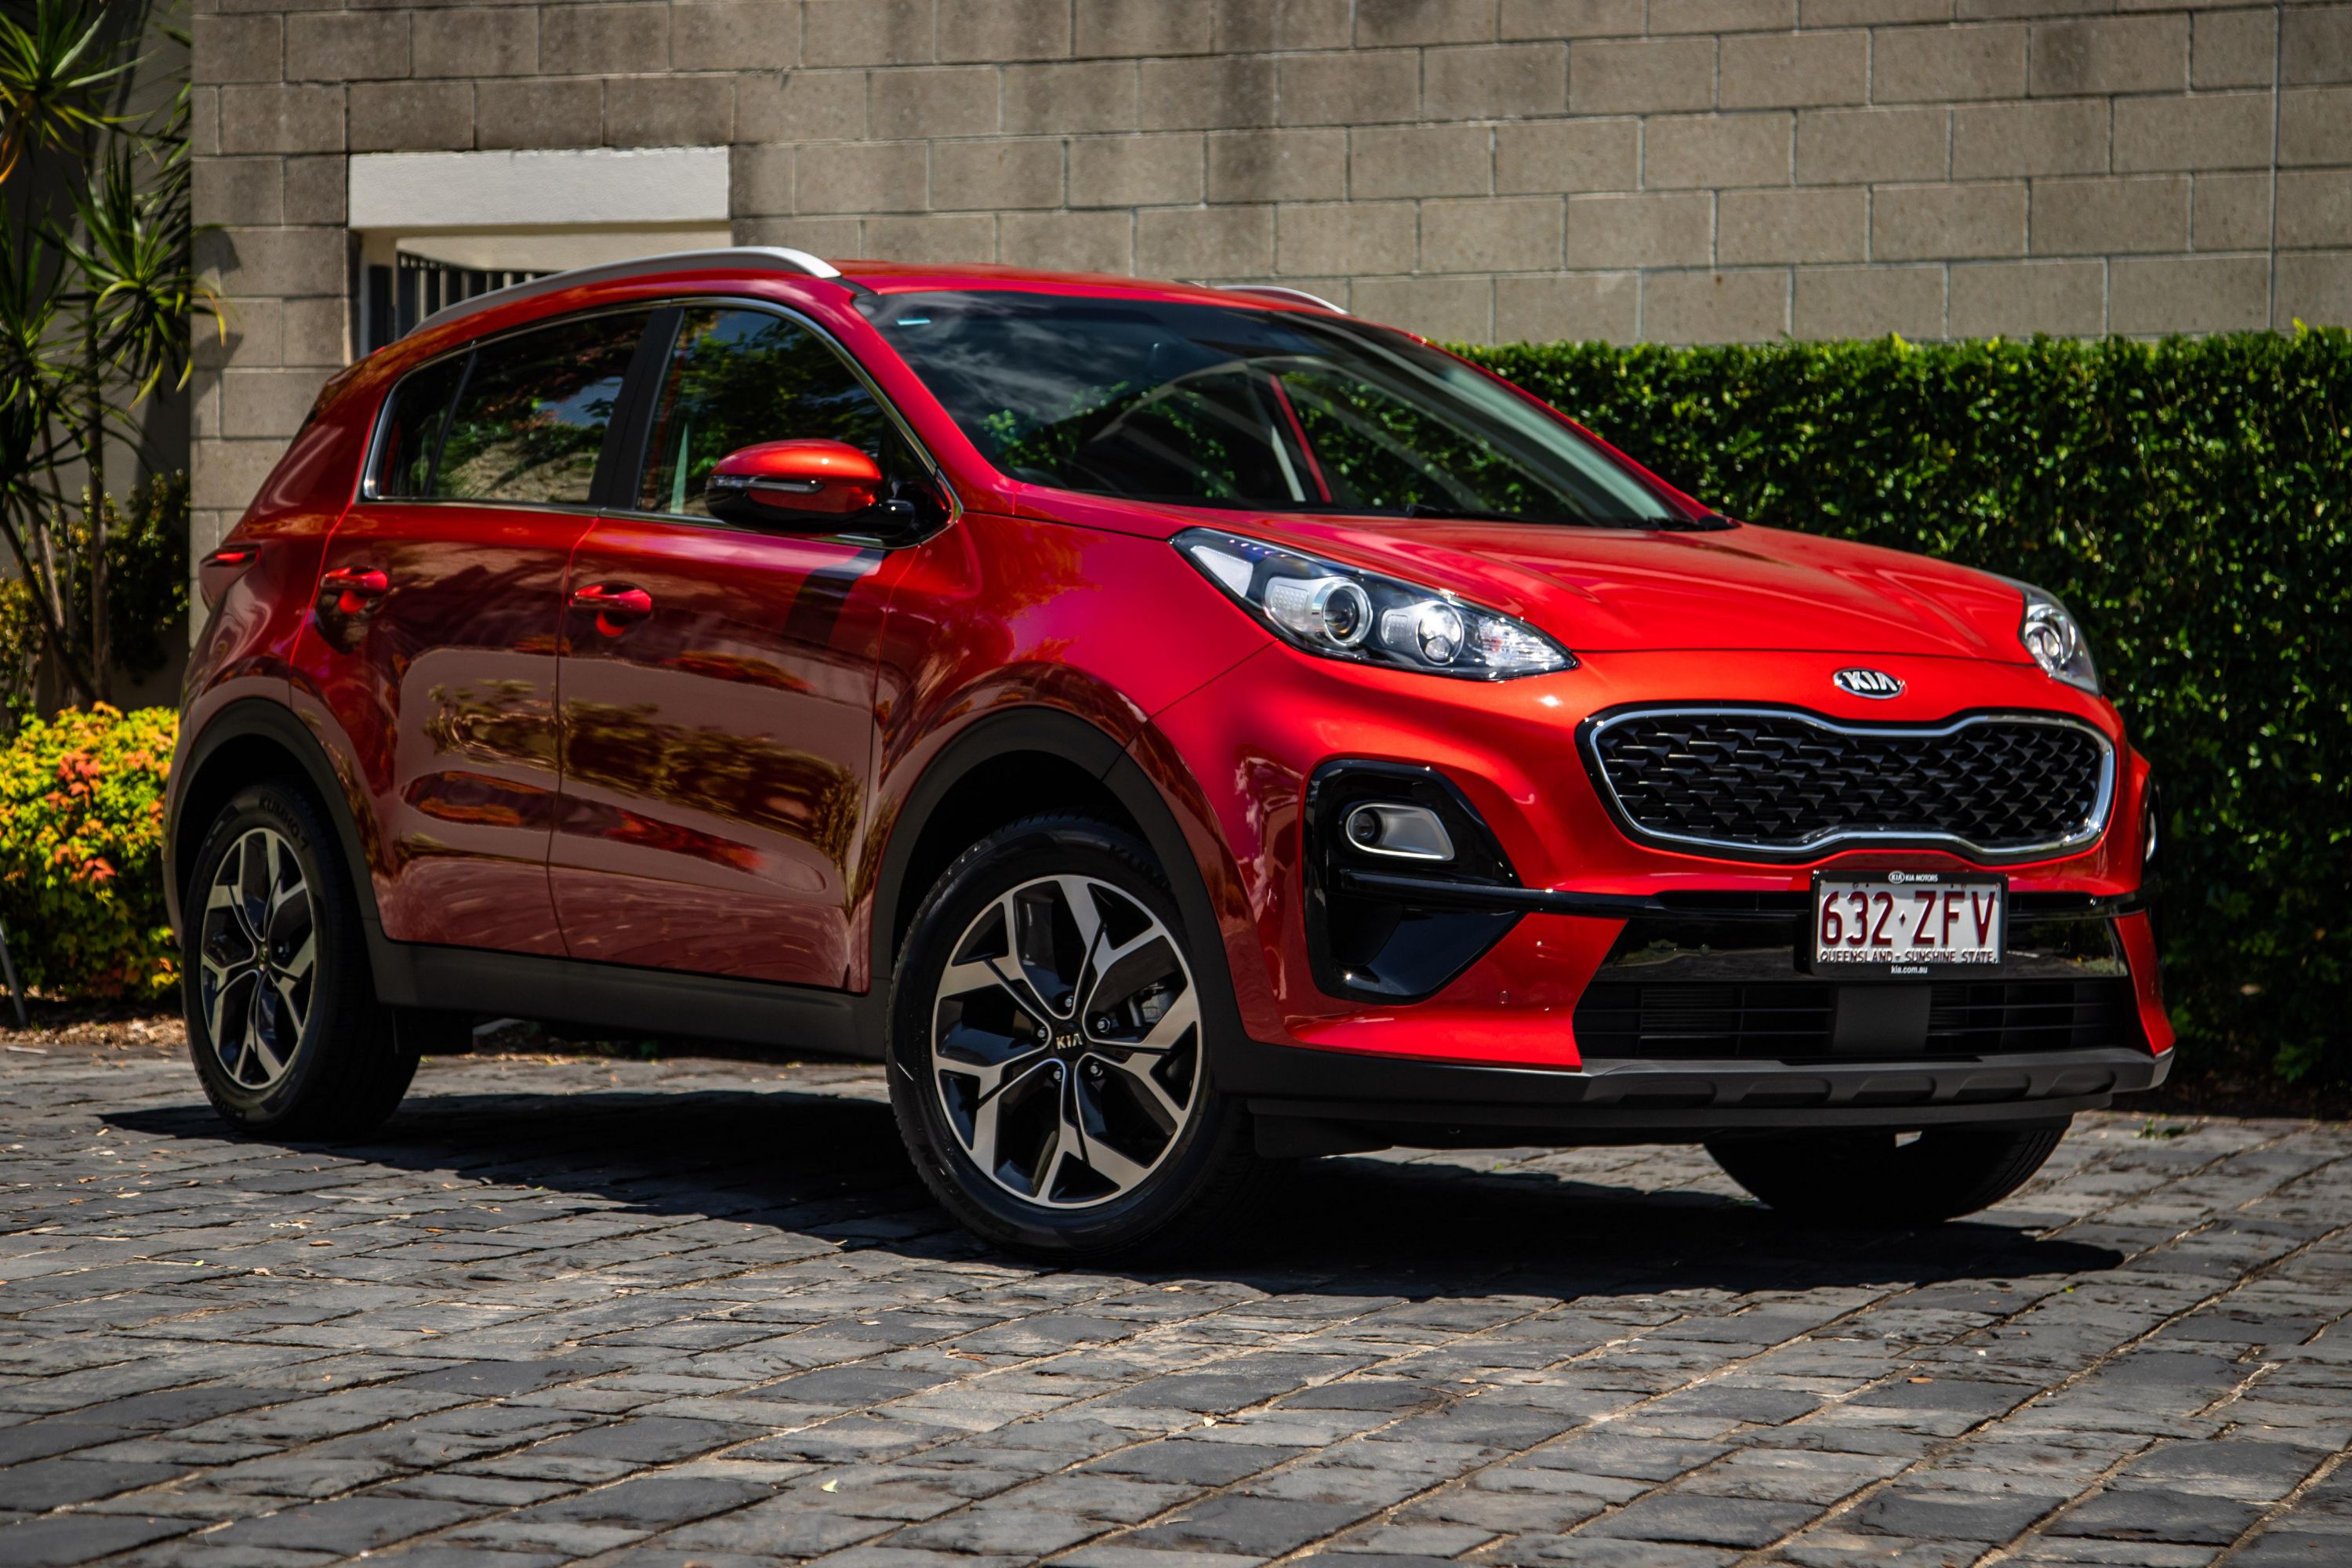 2022 Kia Sportage local launch timing confirmed | CarExpert